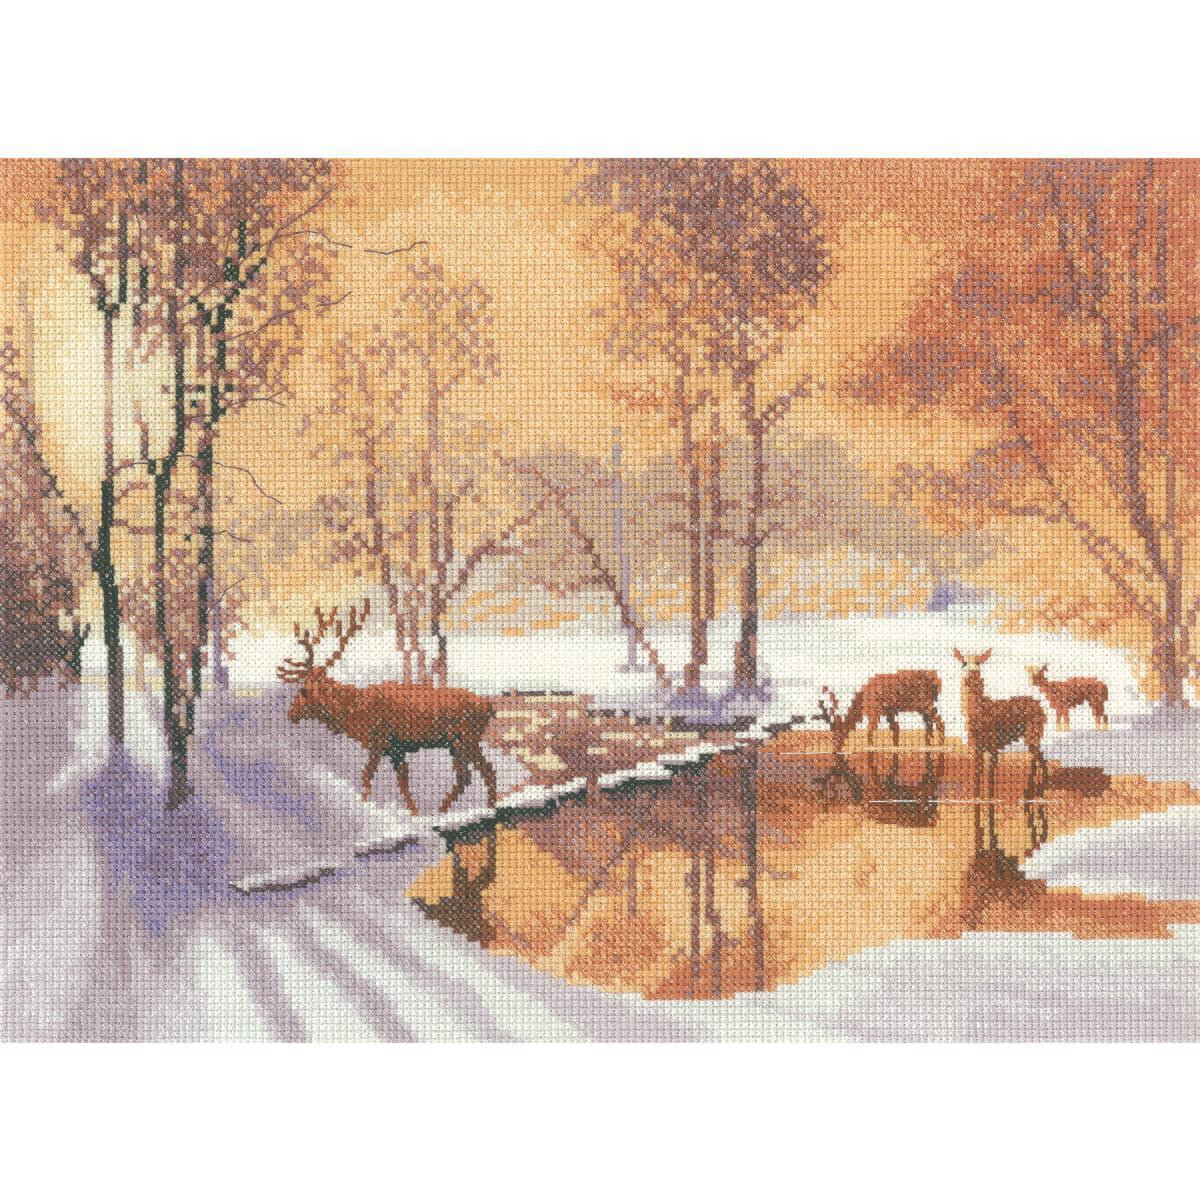 Heritage counted cross stitch kit Aida "Stepping...